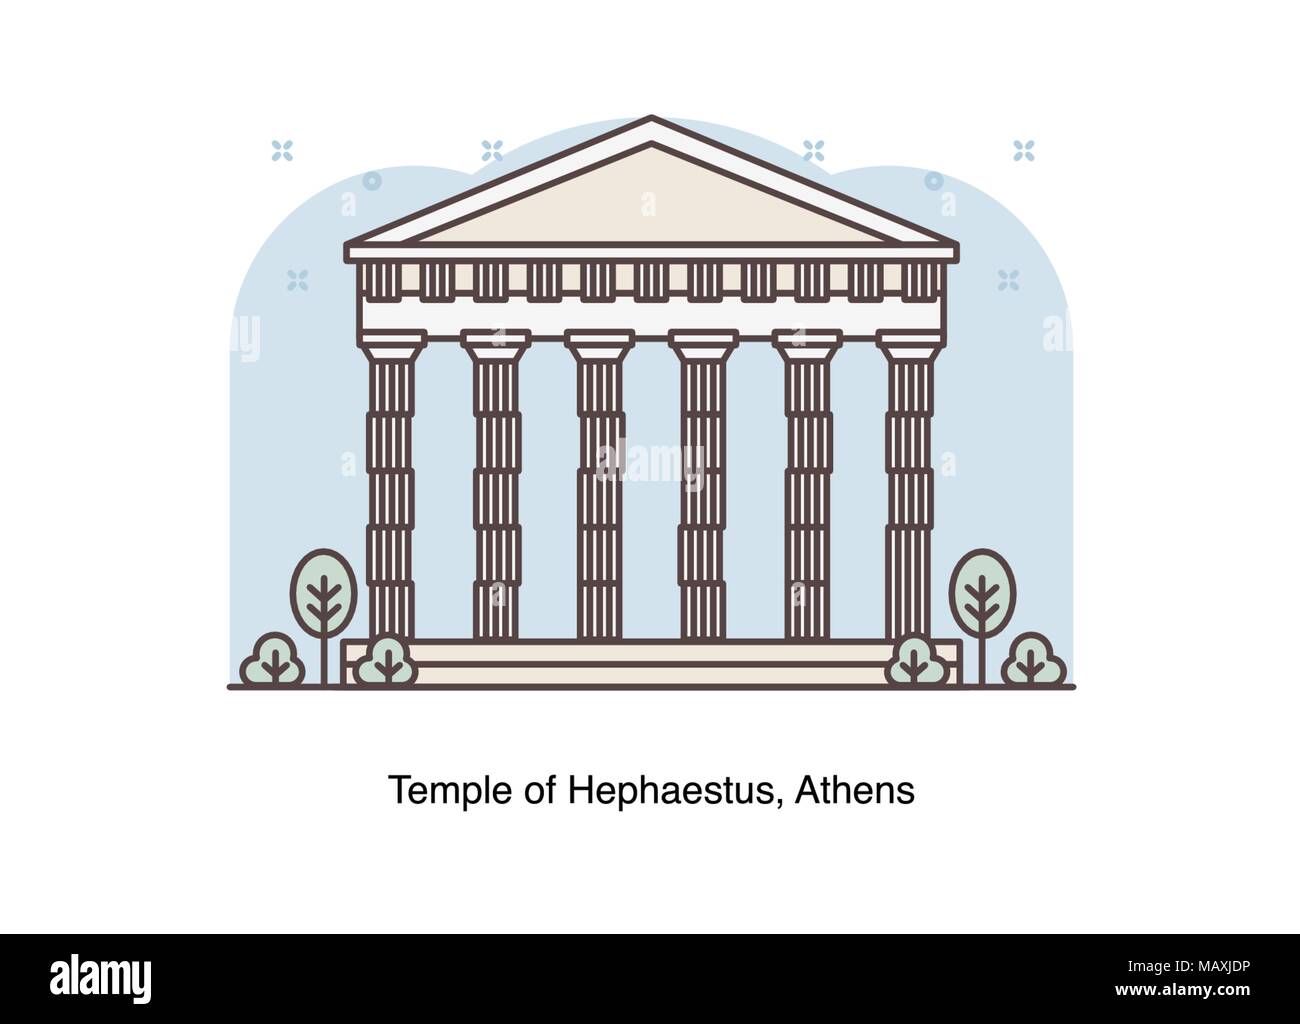 Vector line illustration of the Temple of Hephaestus, Athens, Greece. Stock Vector